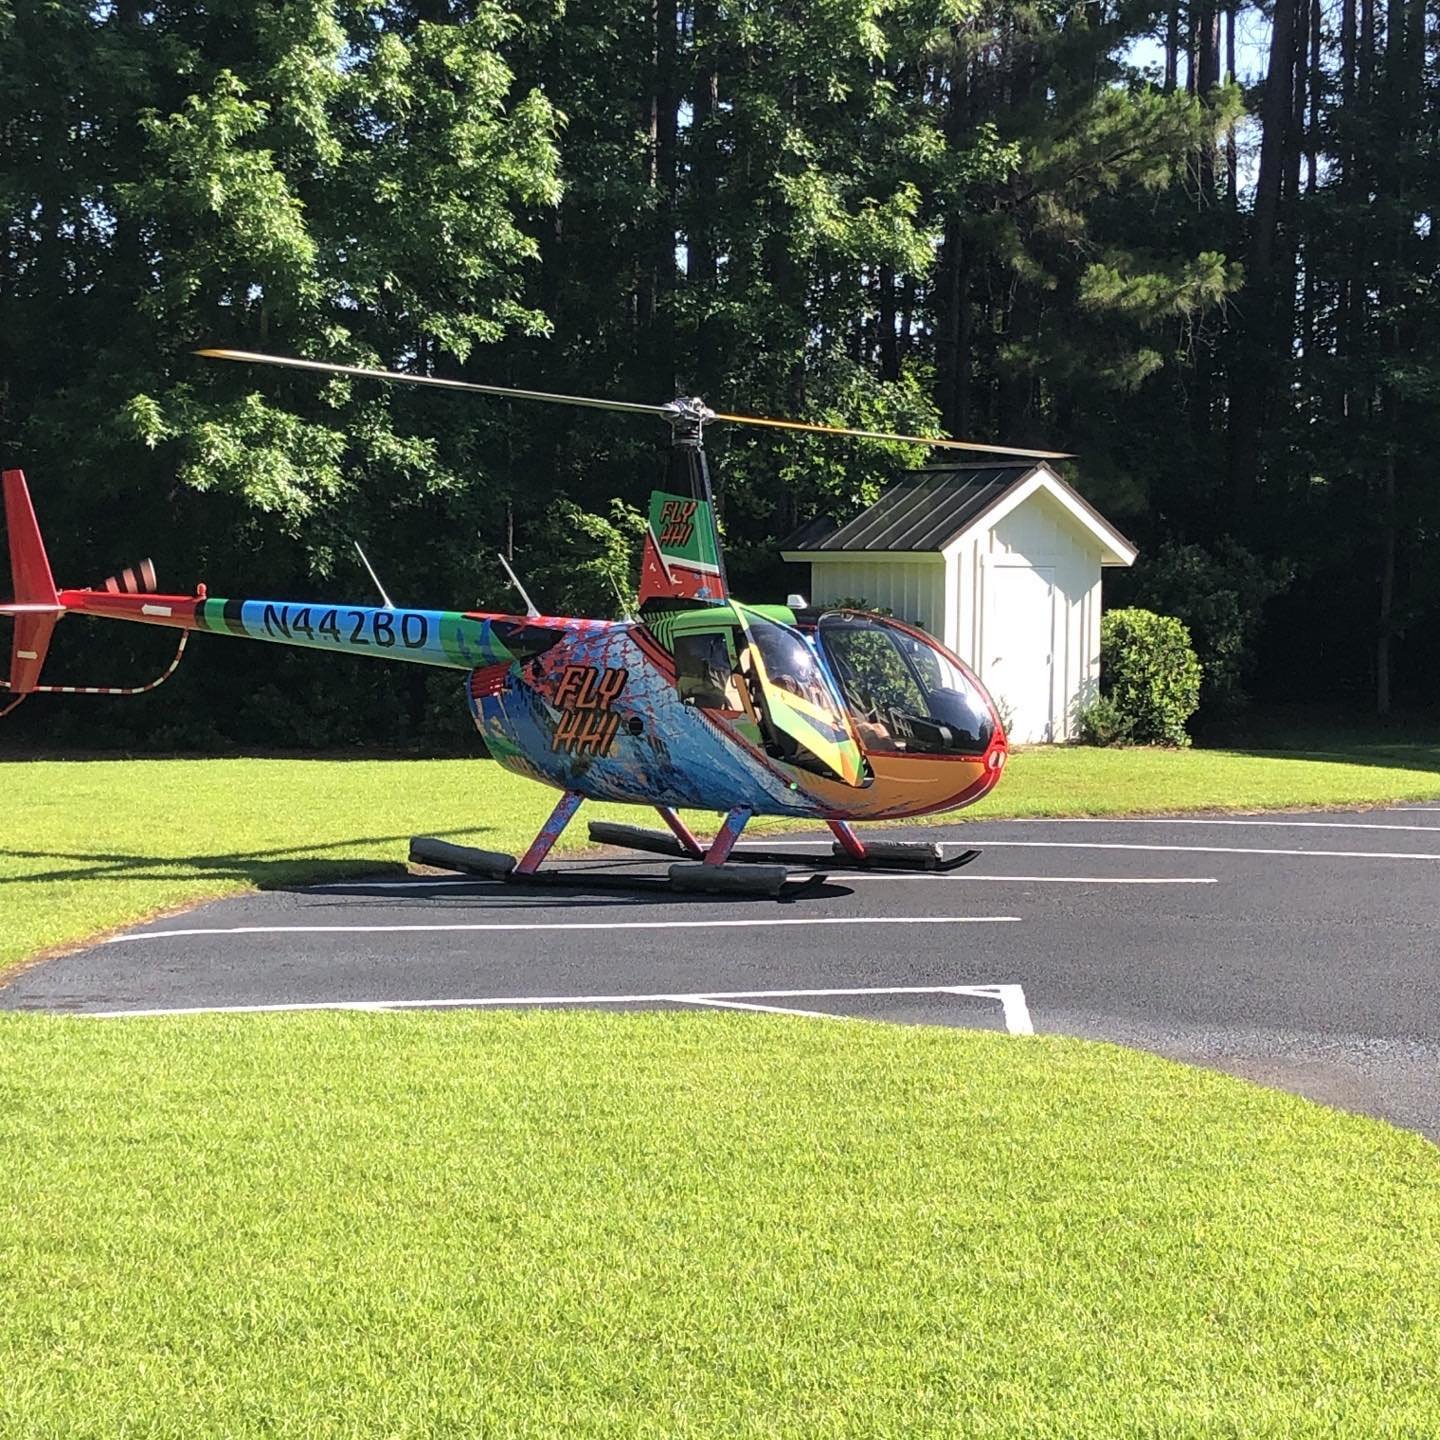 Happening now&hellip; tour over Hilton Head. @mayrivermanor. @flyhhi